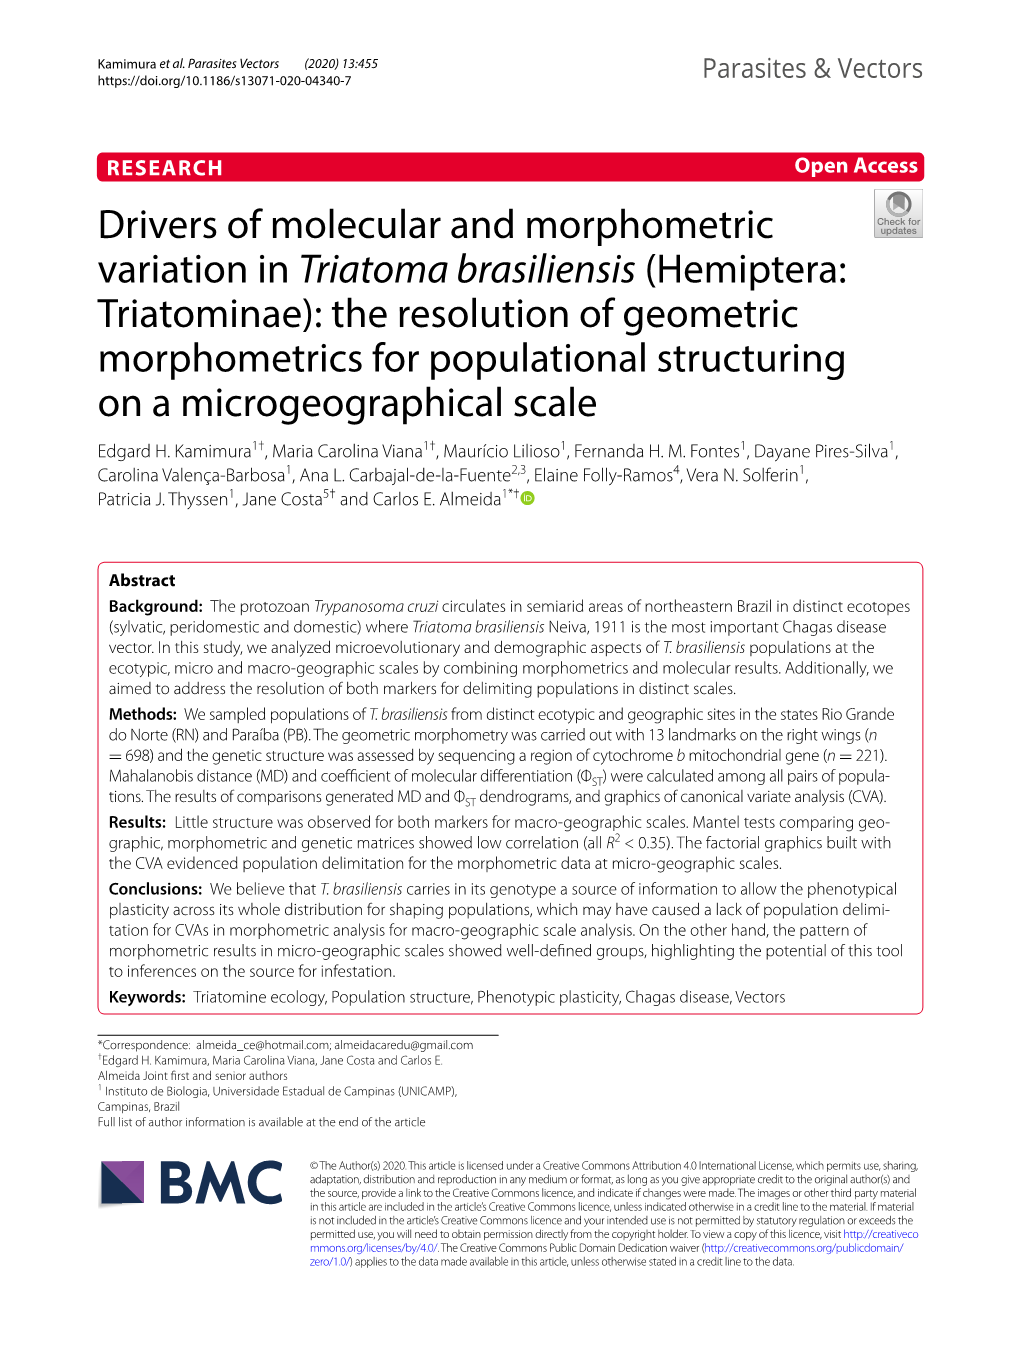 Drivers of Molecular and Morphometric Variation in Triatoma